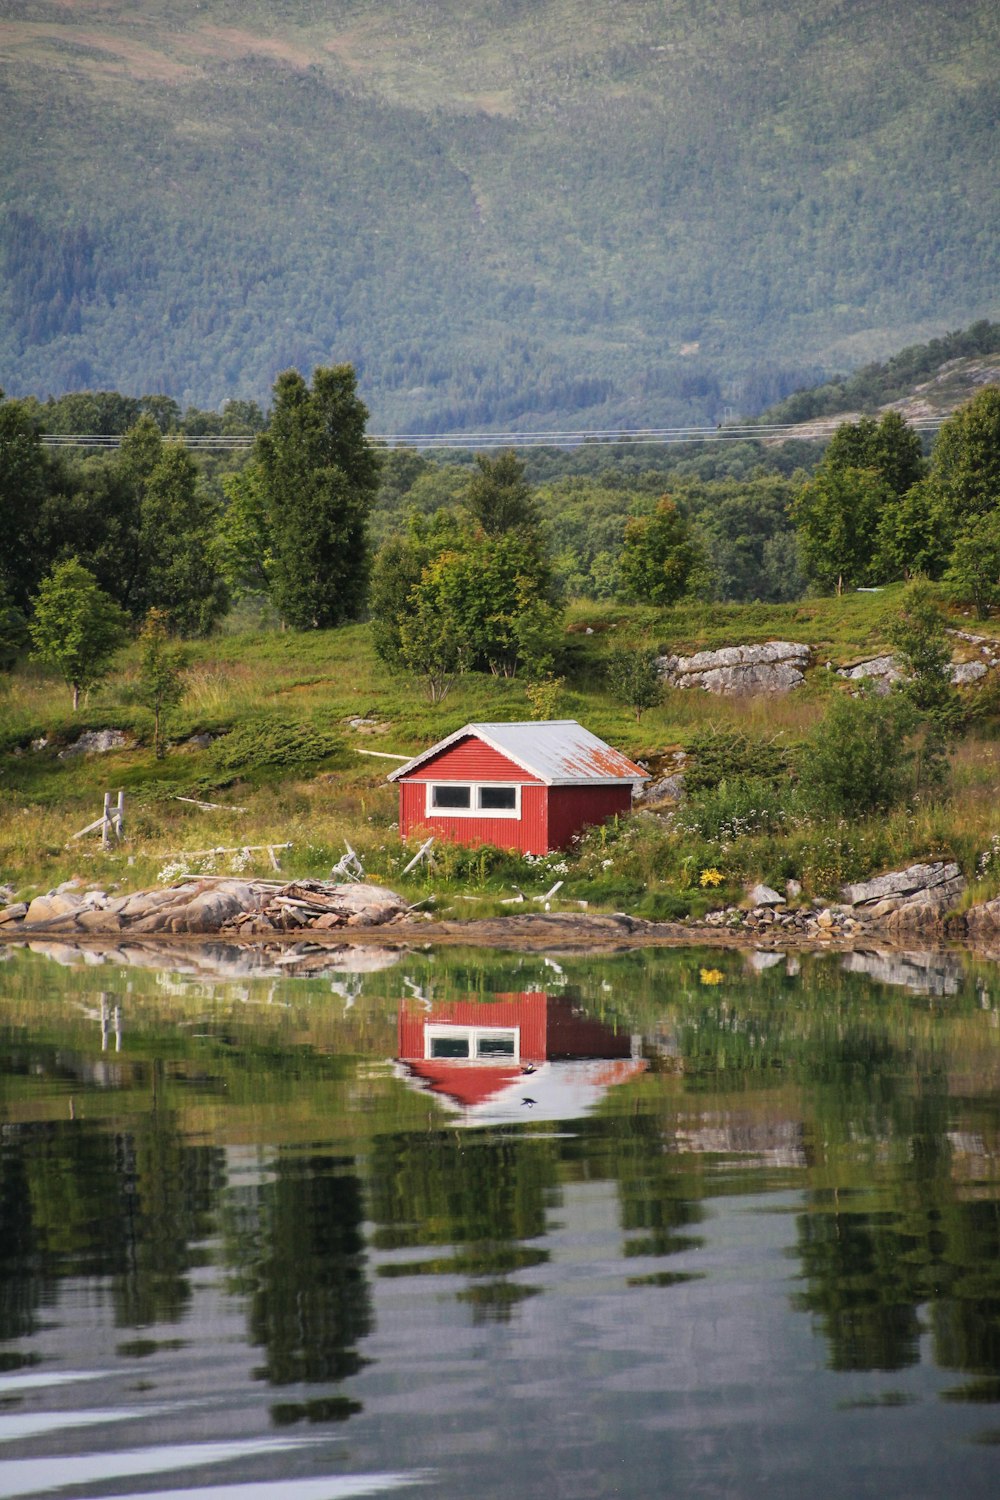 reflection of red and white cabin house on body of water